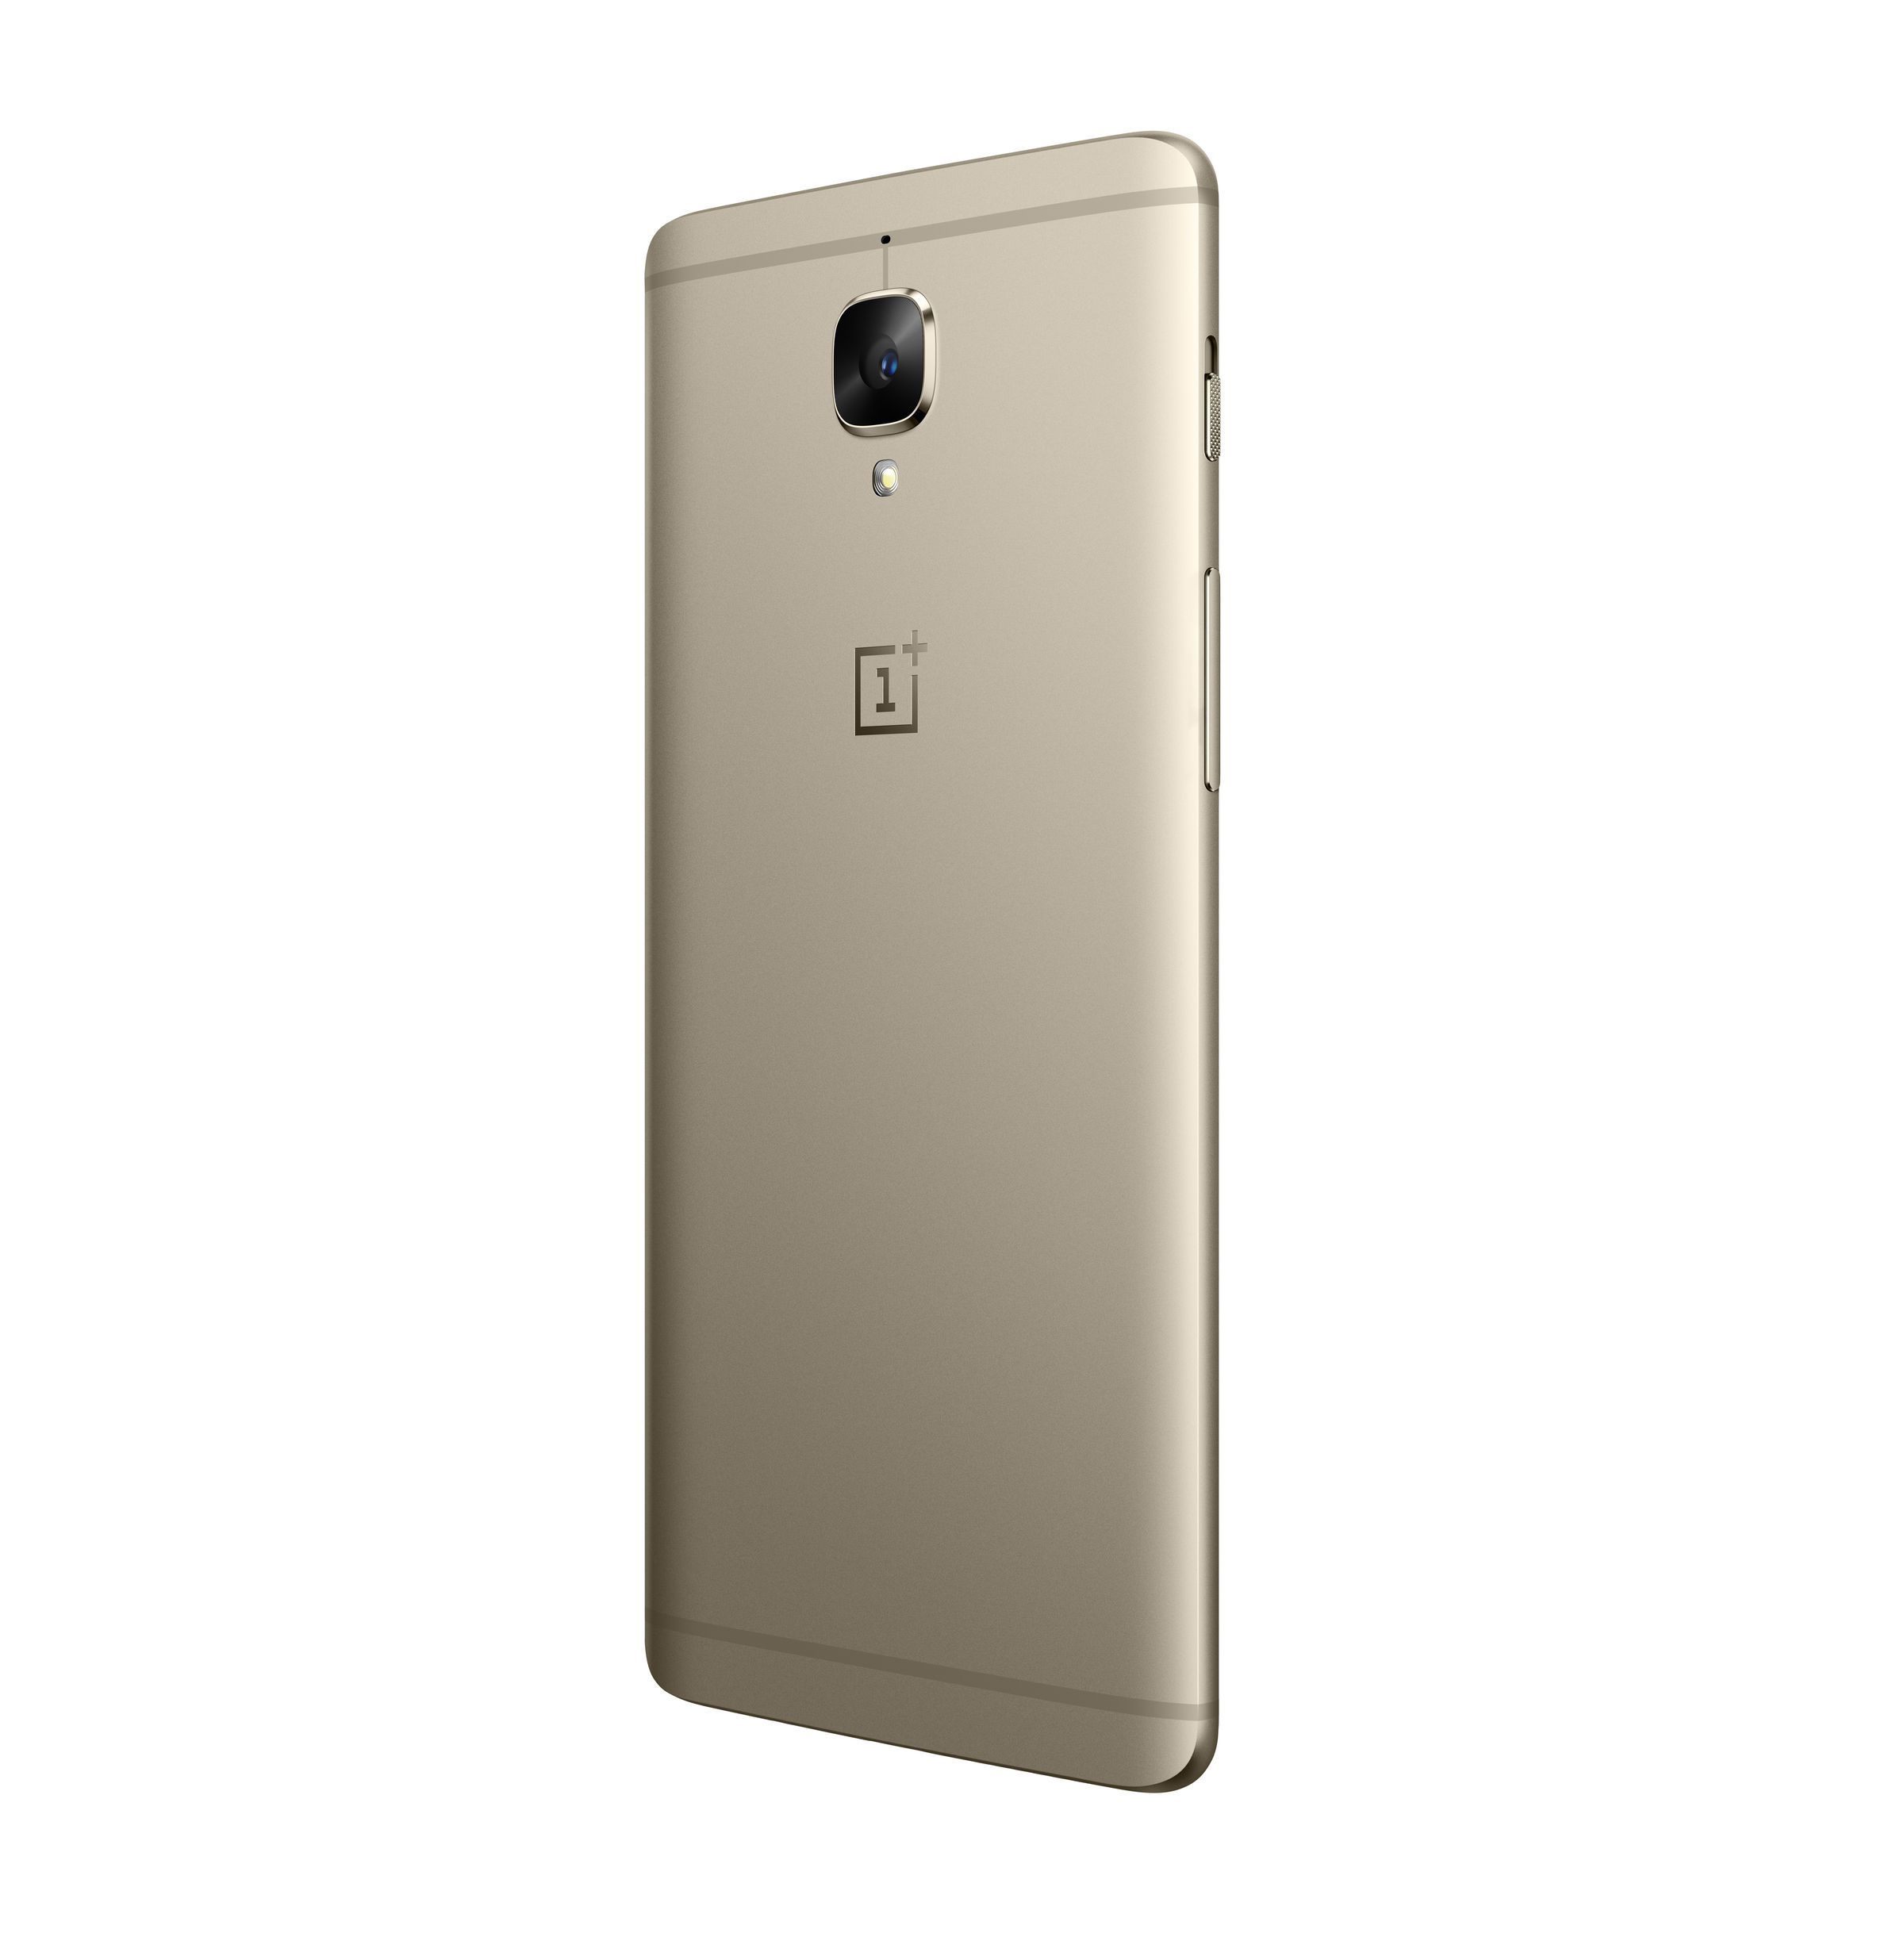 OnePlus 3 press images